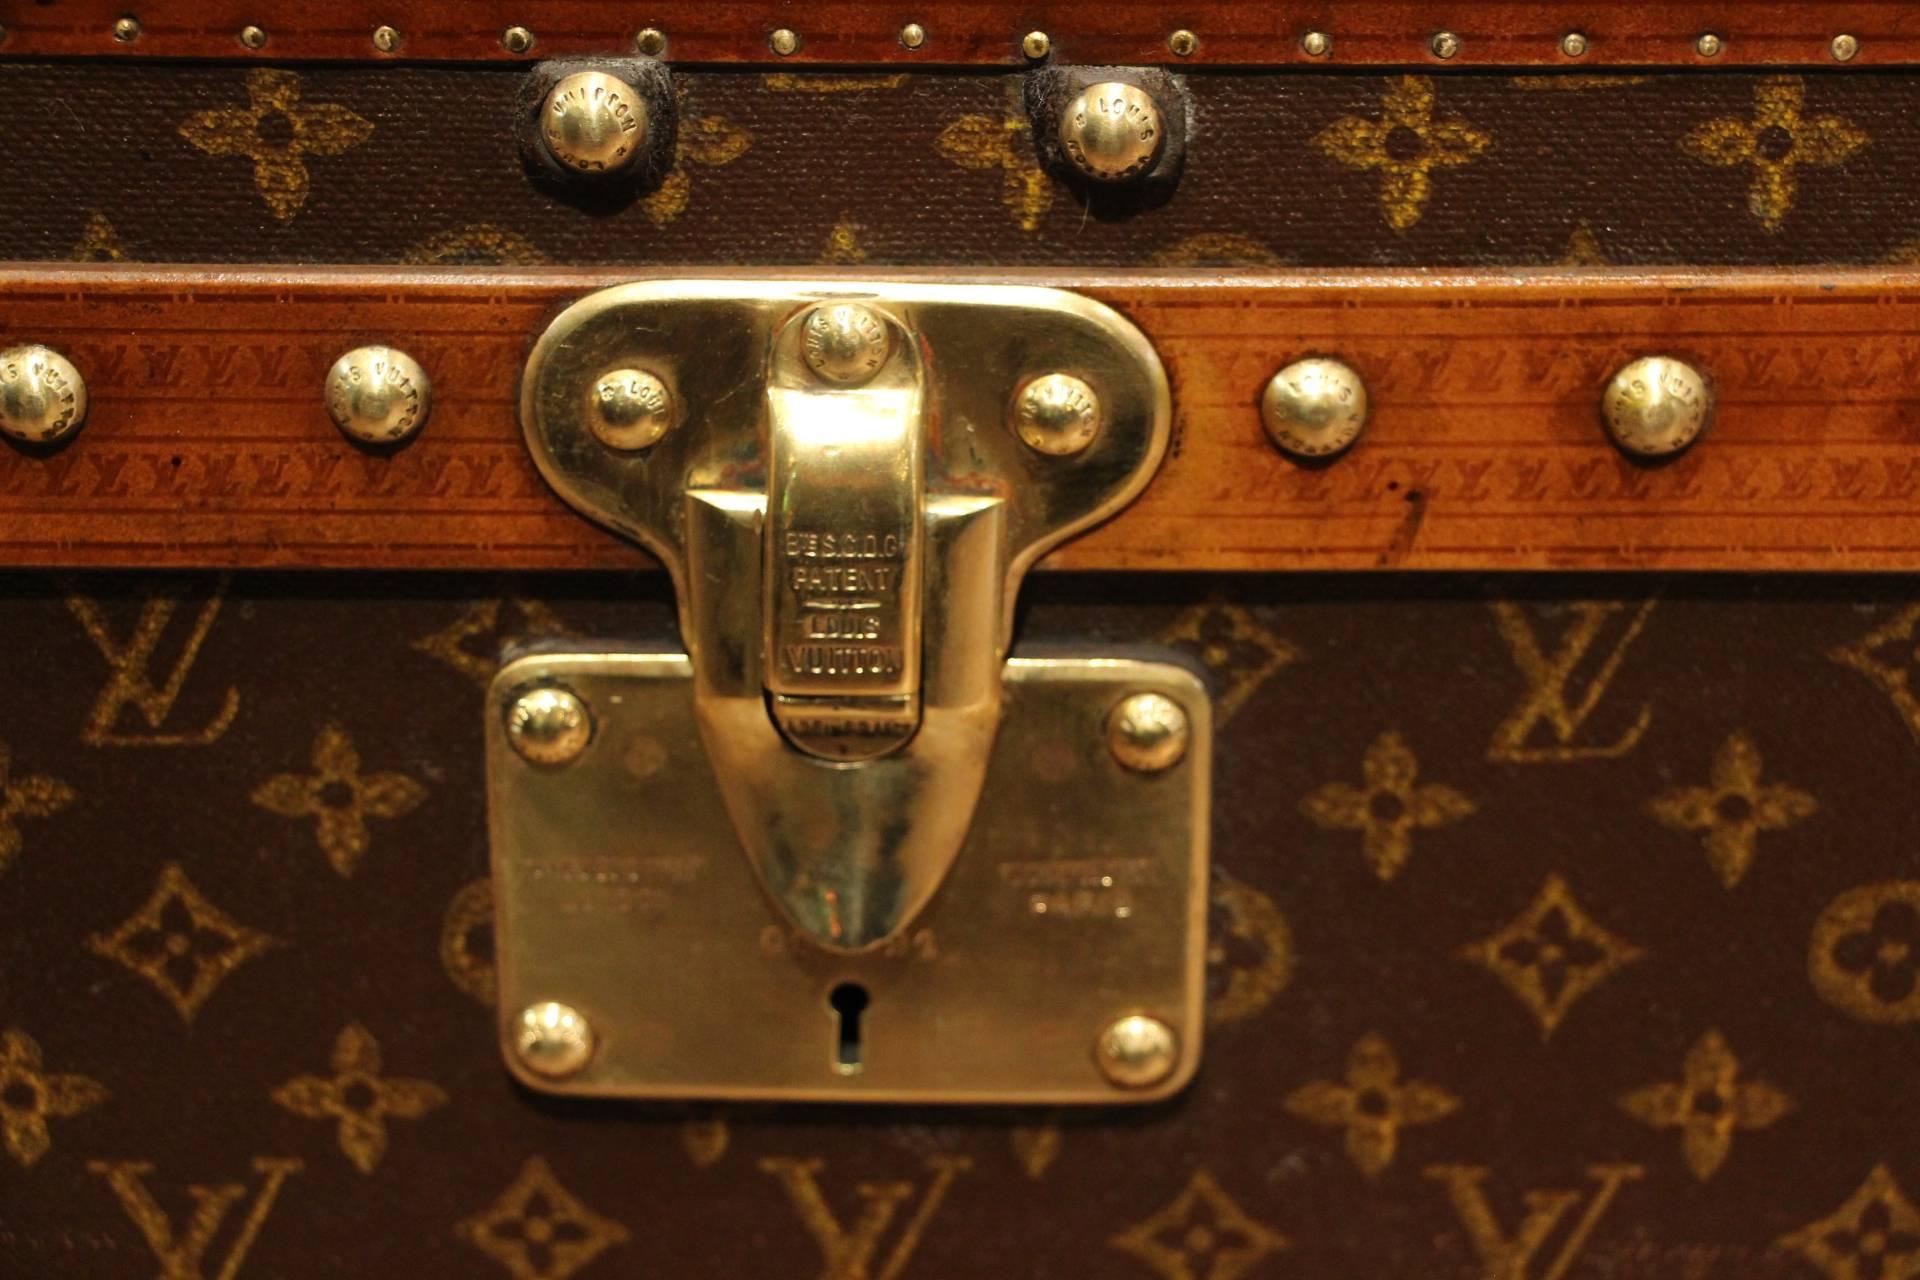 Gorgeous Louis Vuitton monogram canvas hat trunk featuring lozine trim, all brass LV stamped locks and studs. Leather side handles. Very nice and warm patina.
Its interior features two removable original webbed baskets.
Original inside lining too